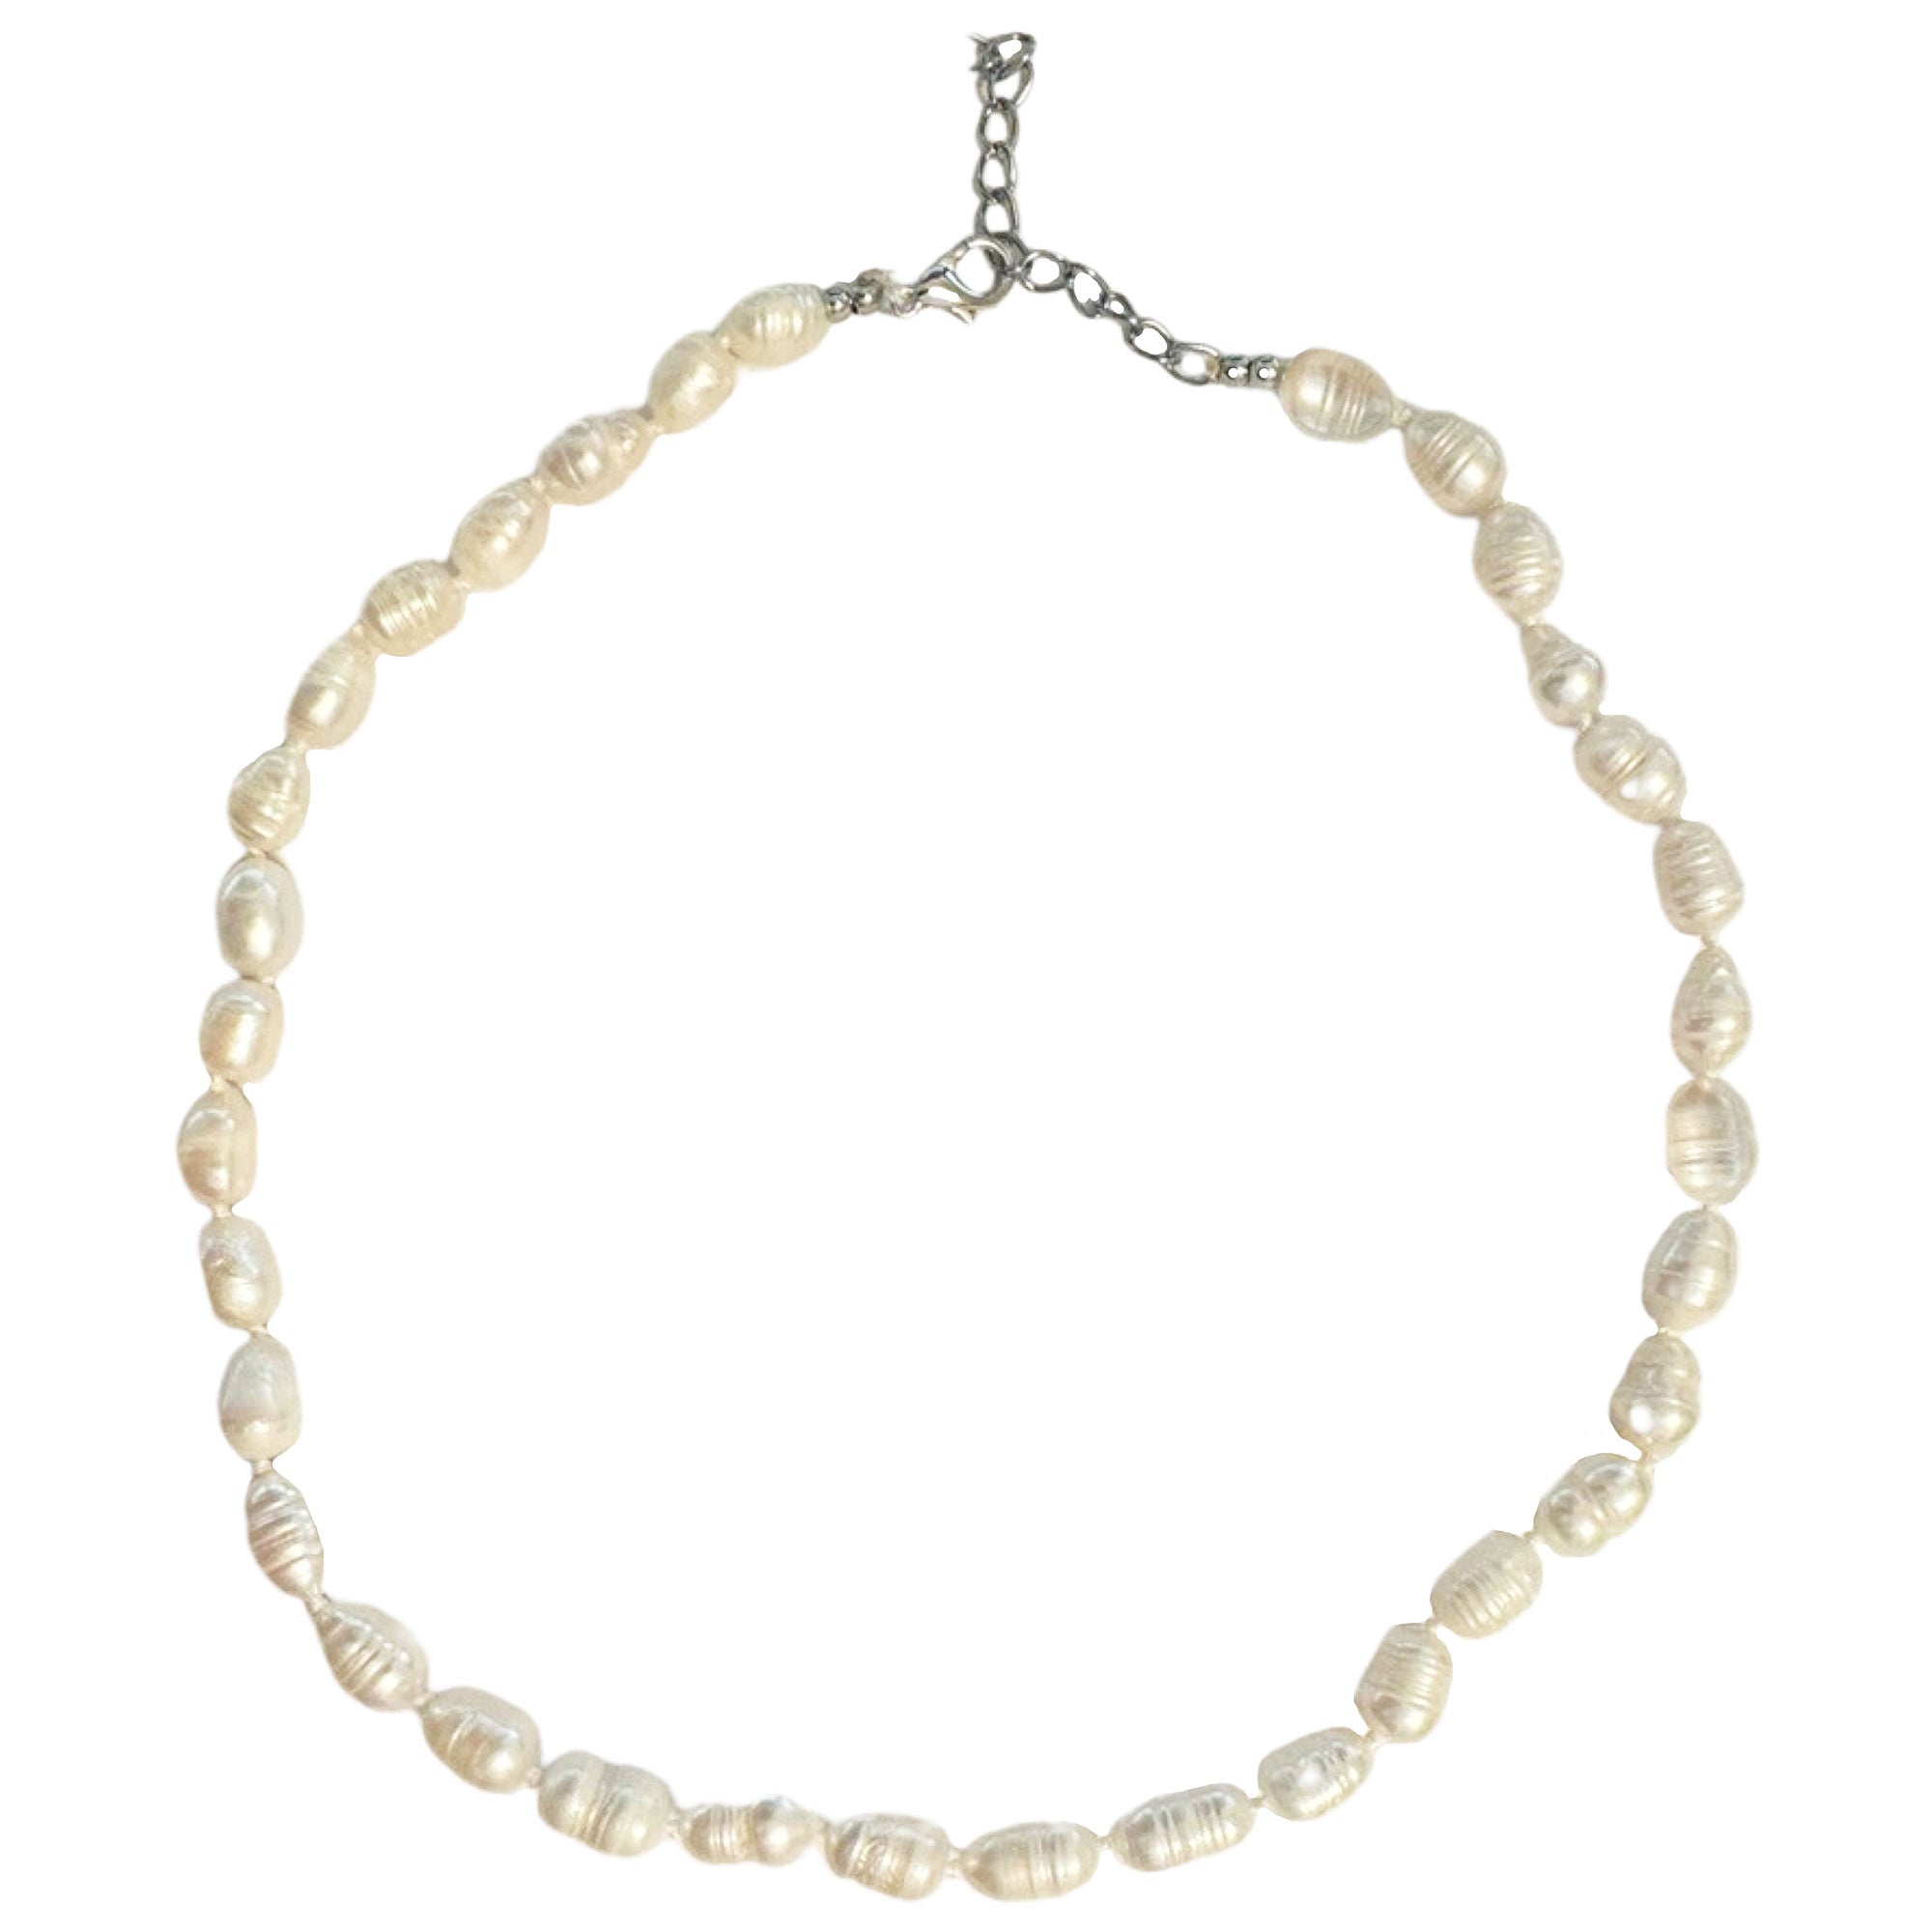 CLEARANCE PEARL NECKLACE (CASE OF 60 - $1.25 / PIECE)  Wholesale Pearl Necklace SKU: 70900-60